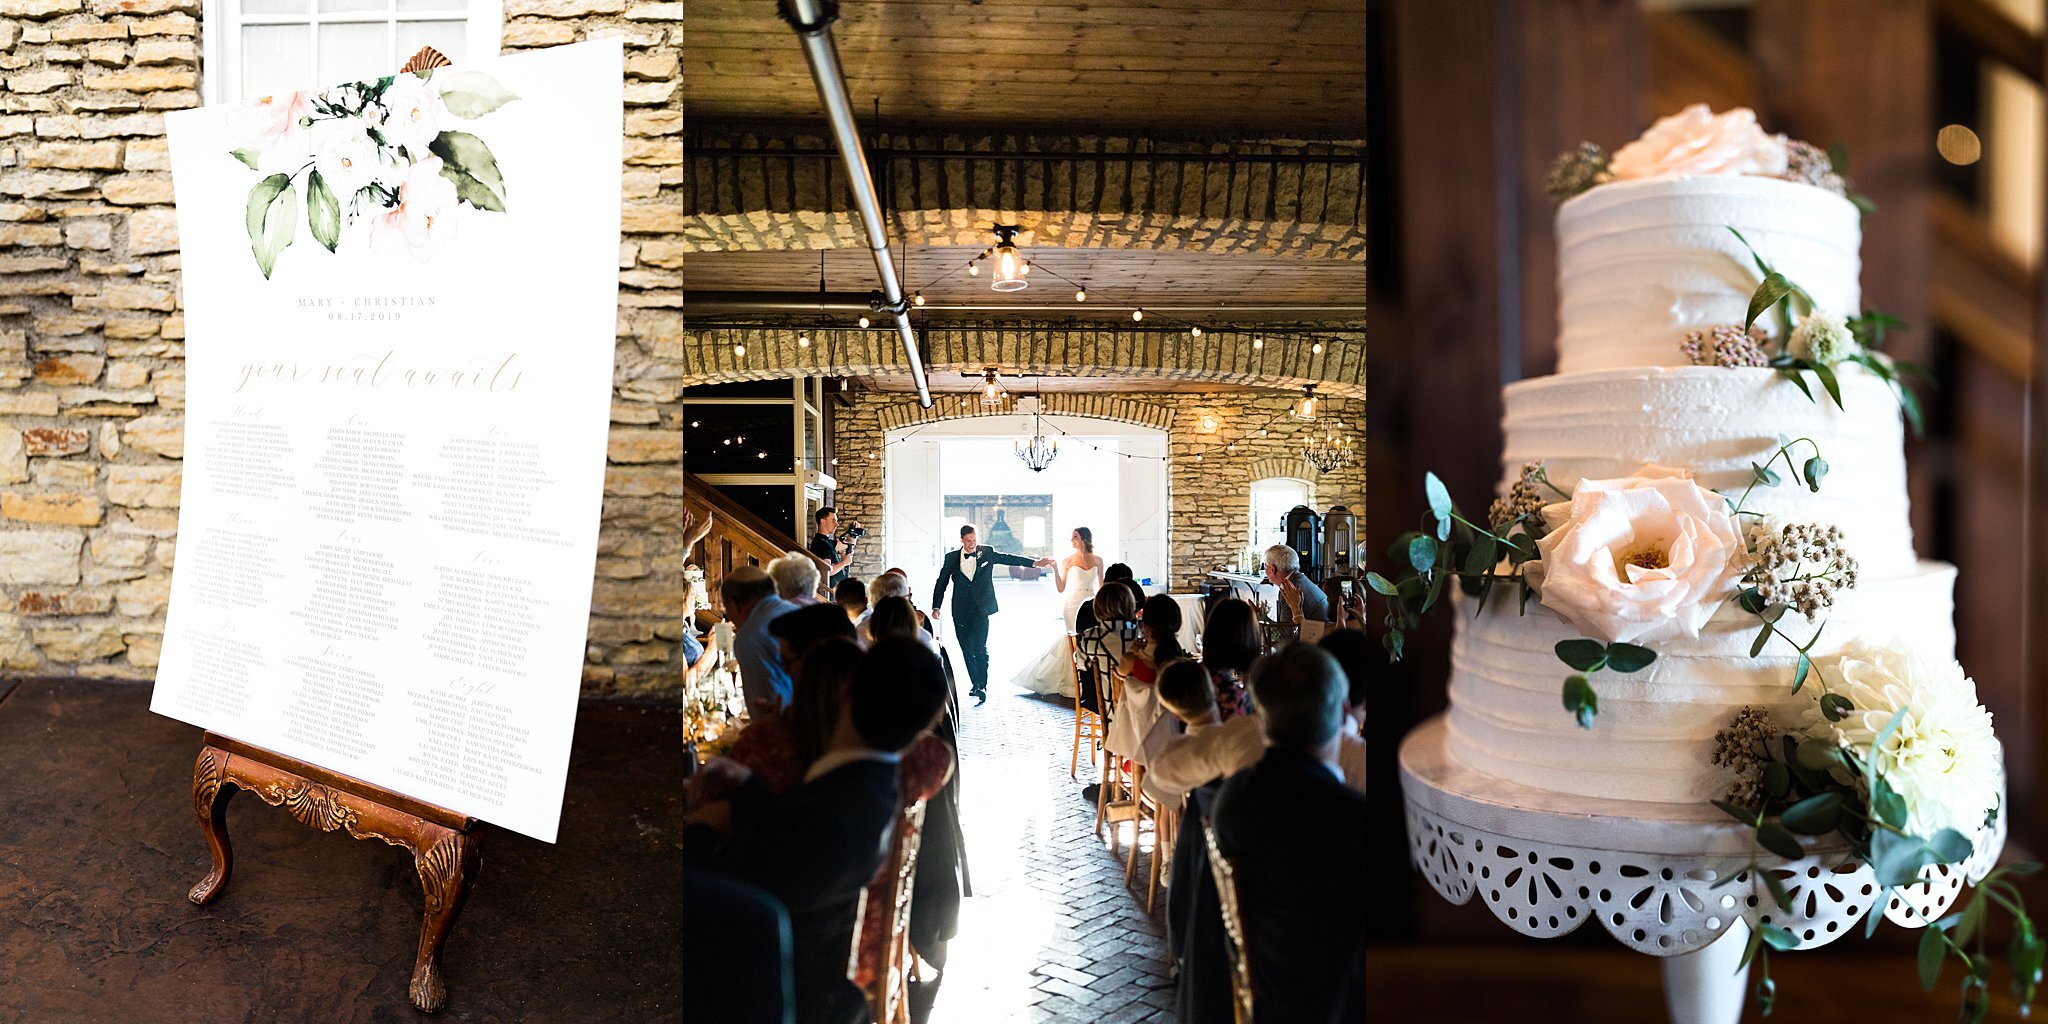  Mayowood Stone Barn wedding collage of guest list, reception entrance and cake. 